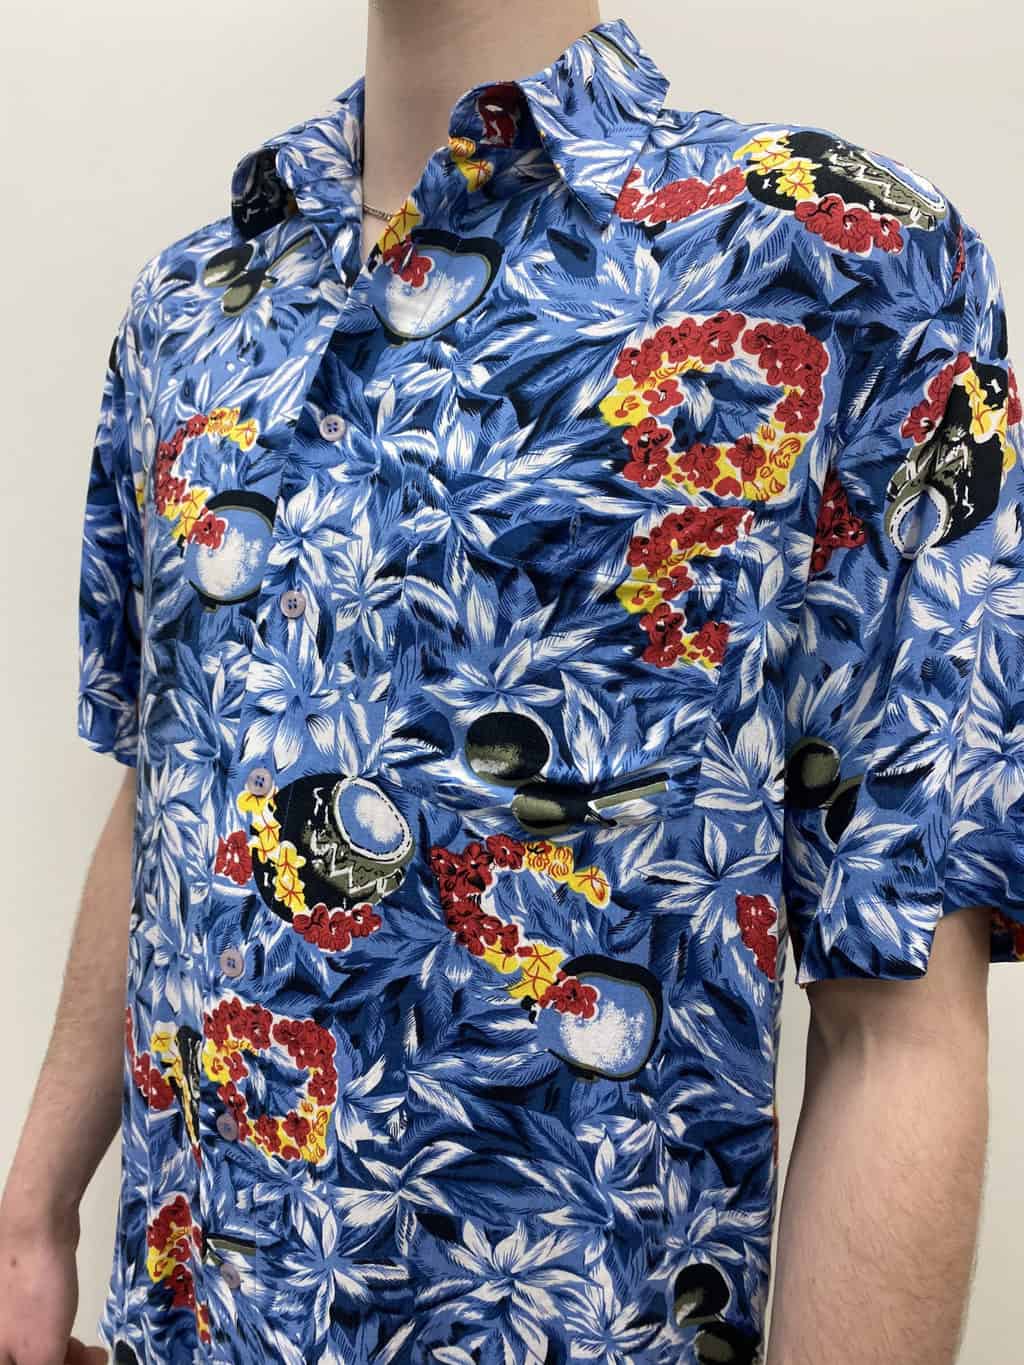 Mens vintage floral Hawaiian shirt with coconuts and lei garlands in blue  and red - Large